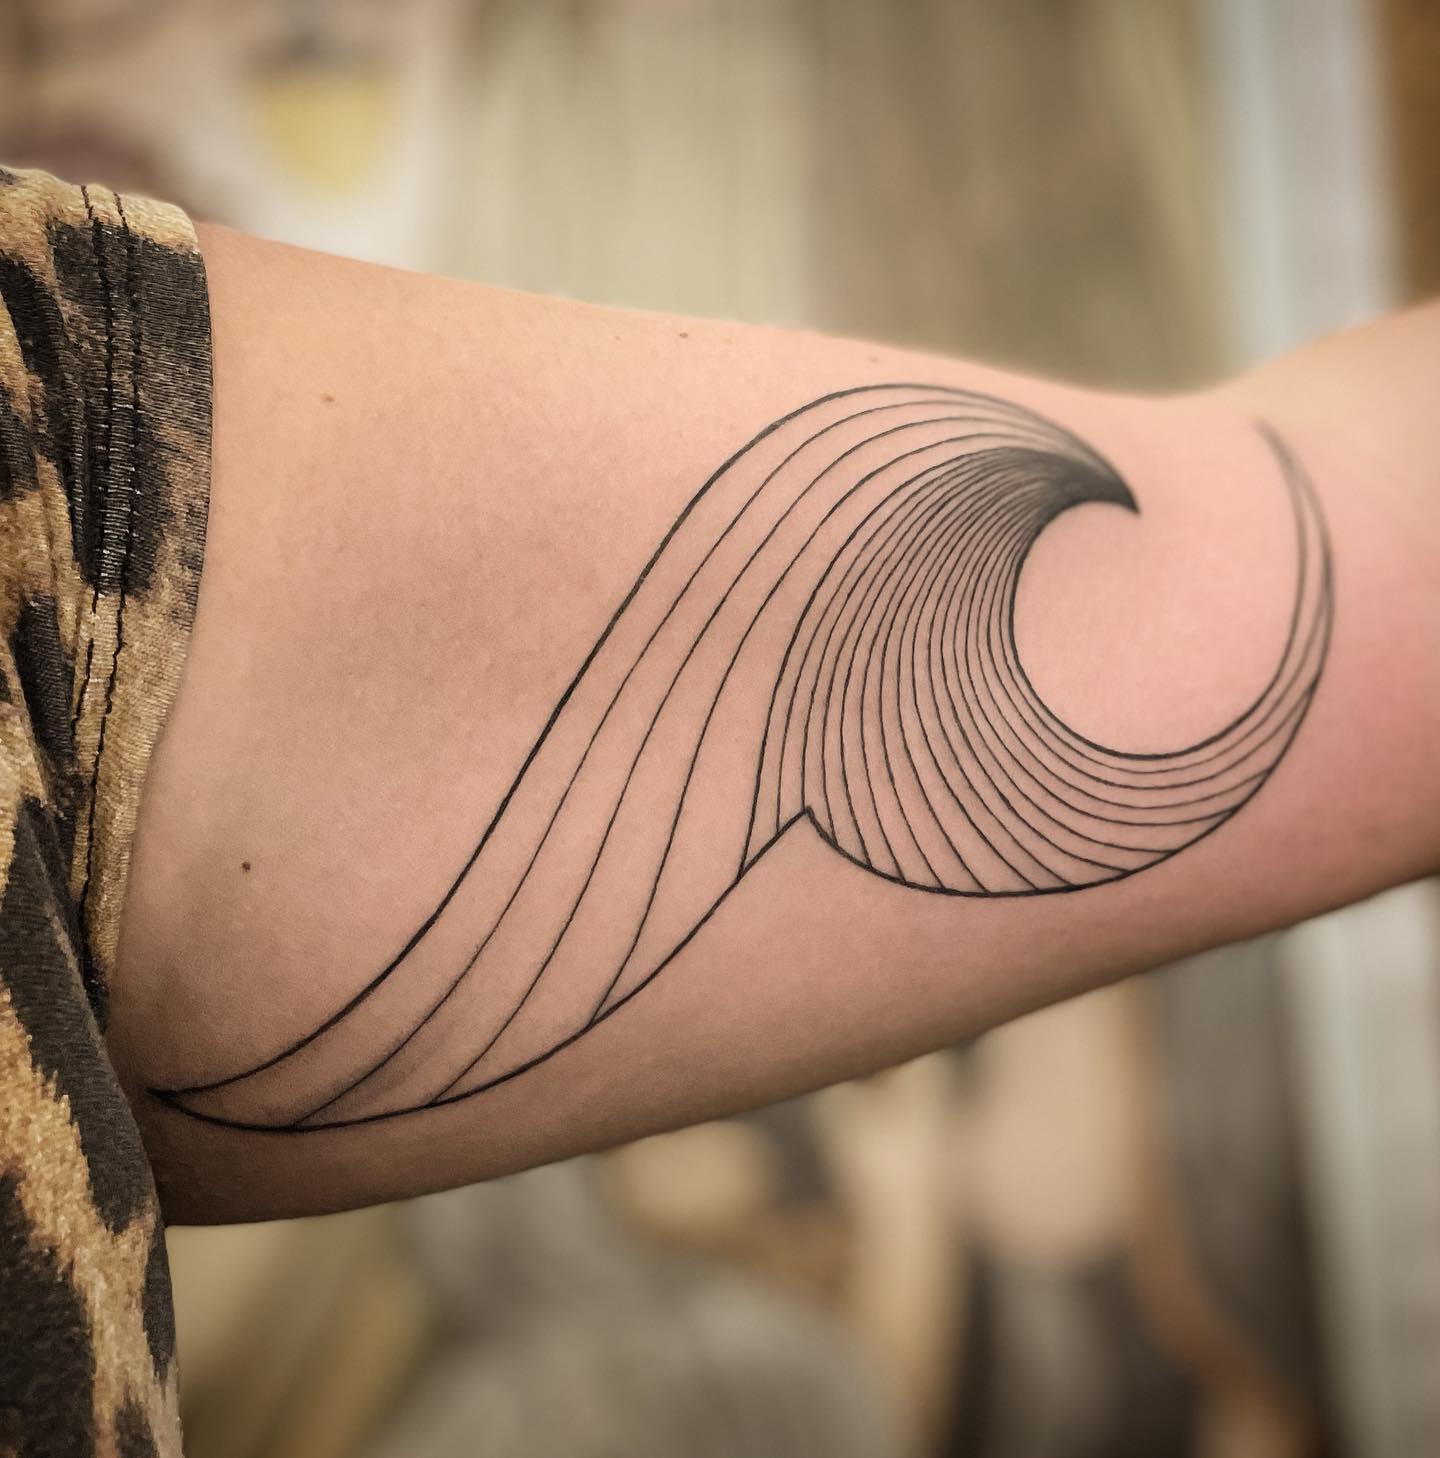 Shoulder tribal tattoo with wave and feather